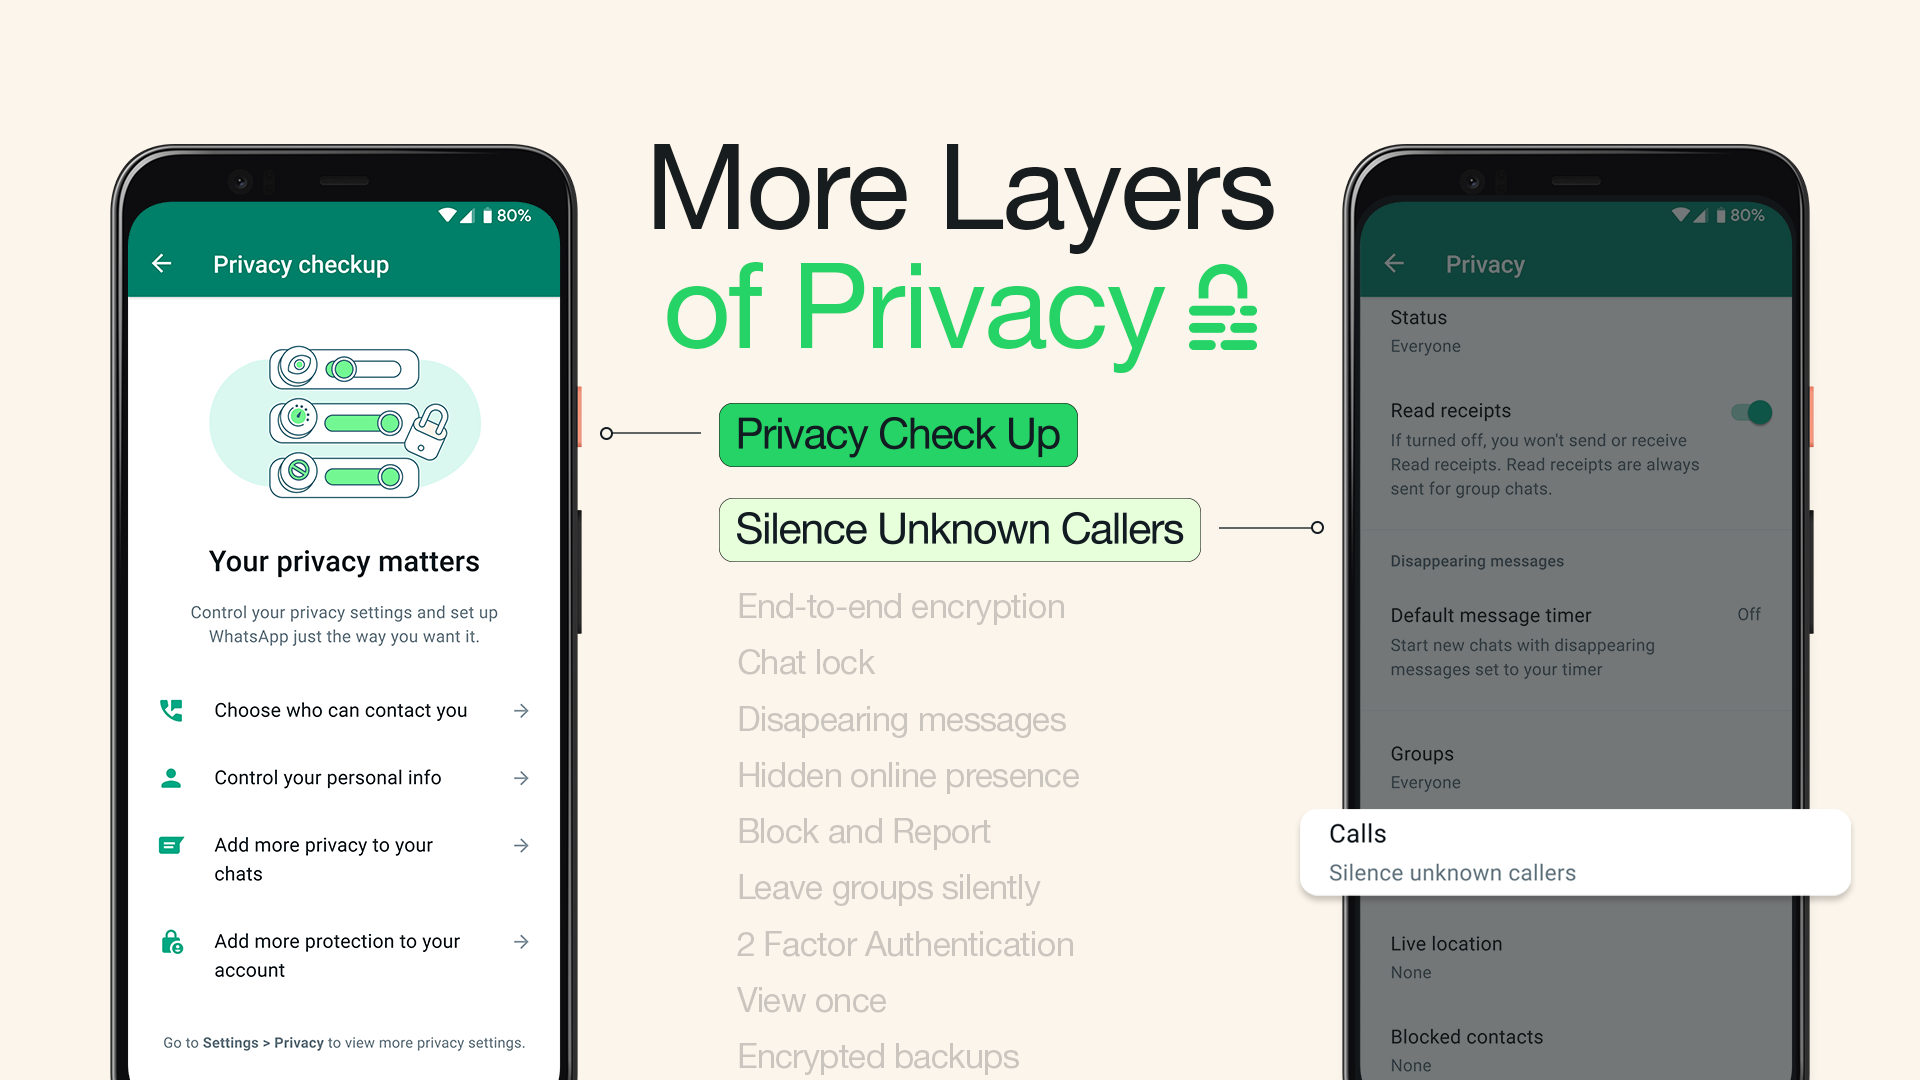 WhatsApp Now Allows Users To Silence Unknown Callers To Counter Scam Calls